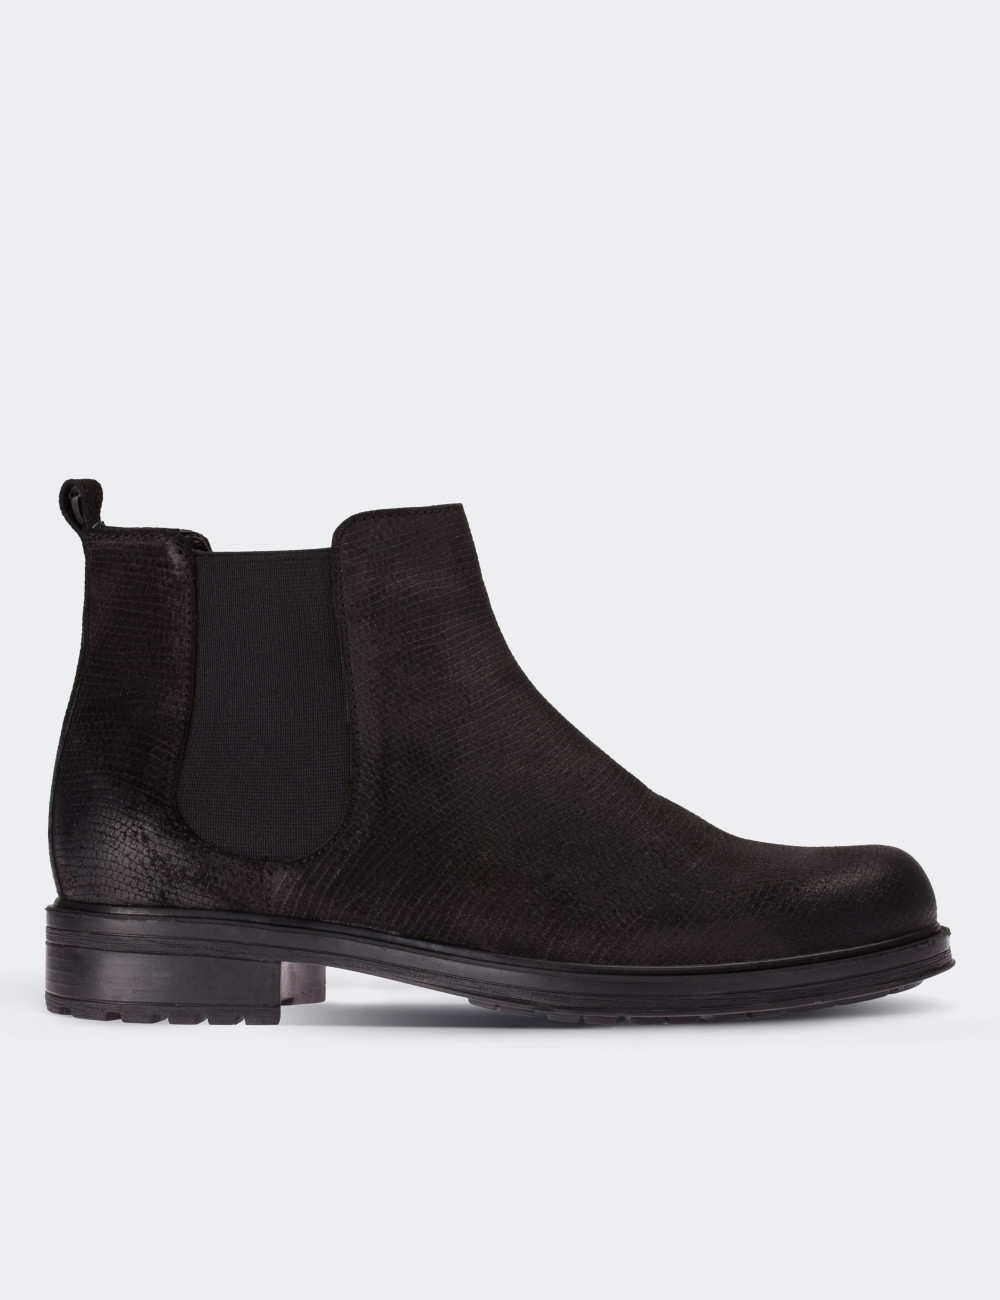 Black Suede Leather Chelsea Boots - 01573ZSYHC01